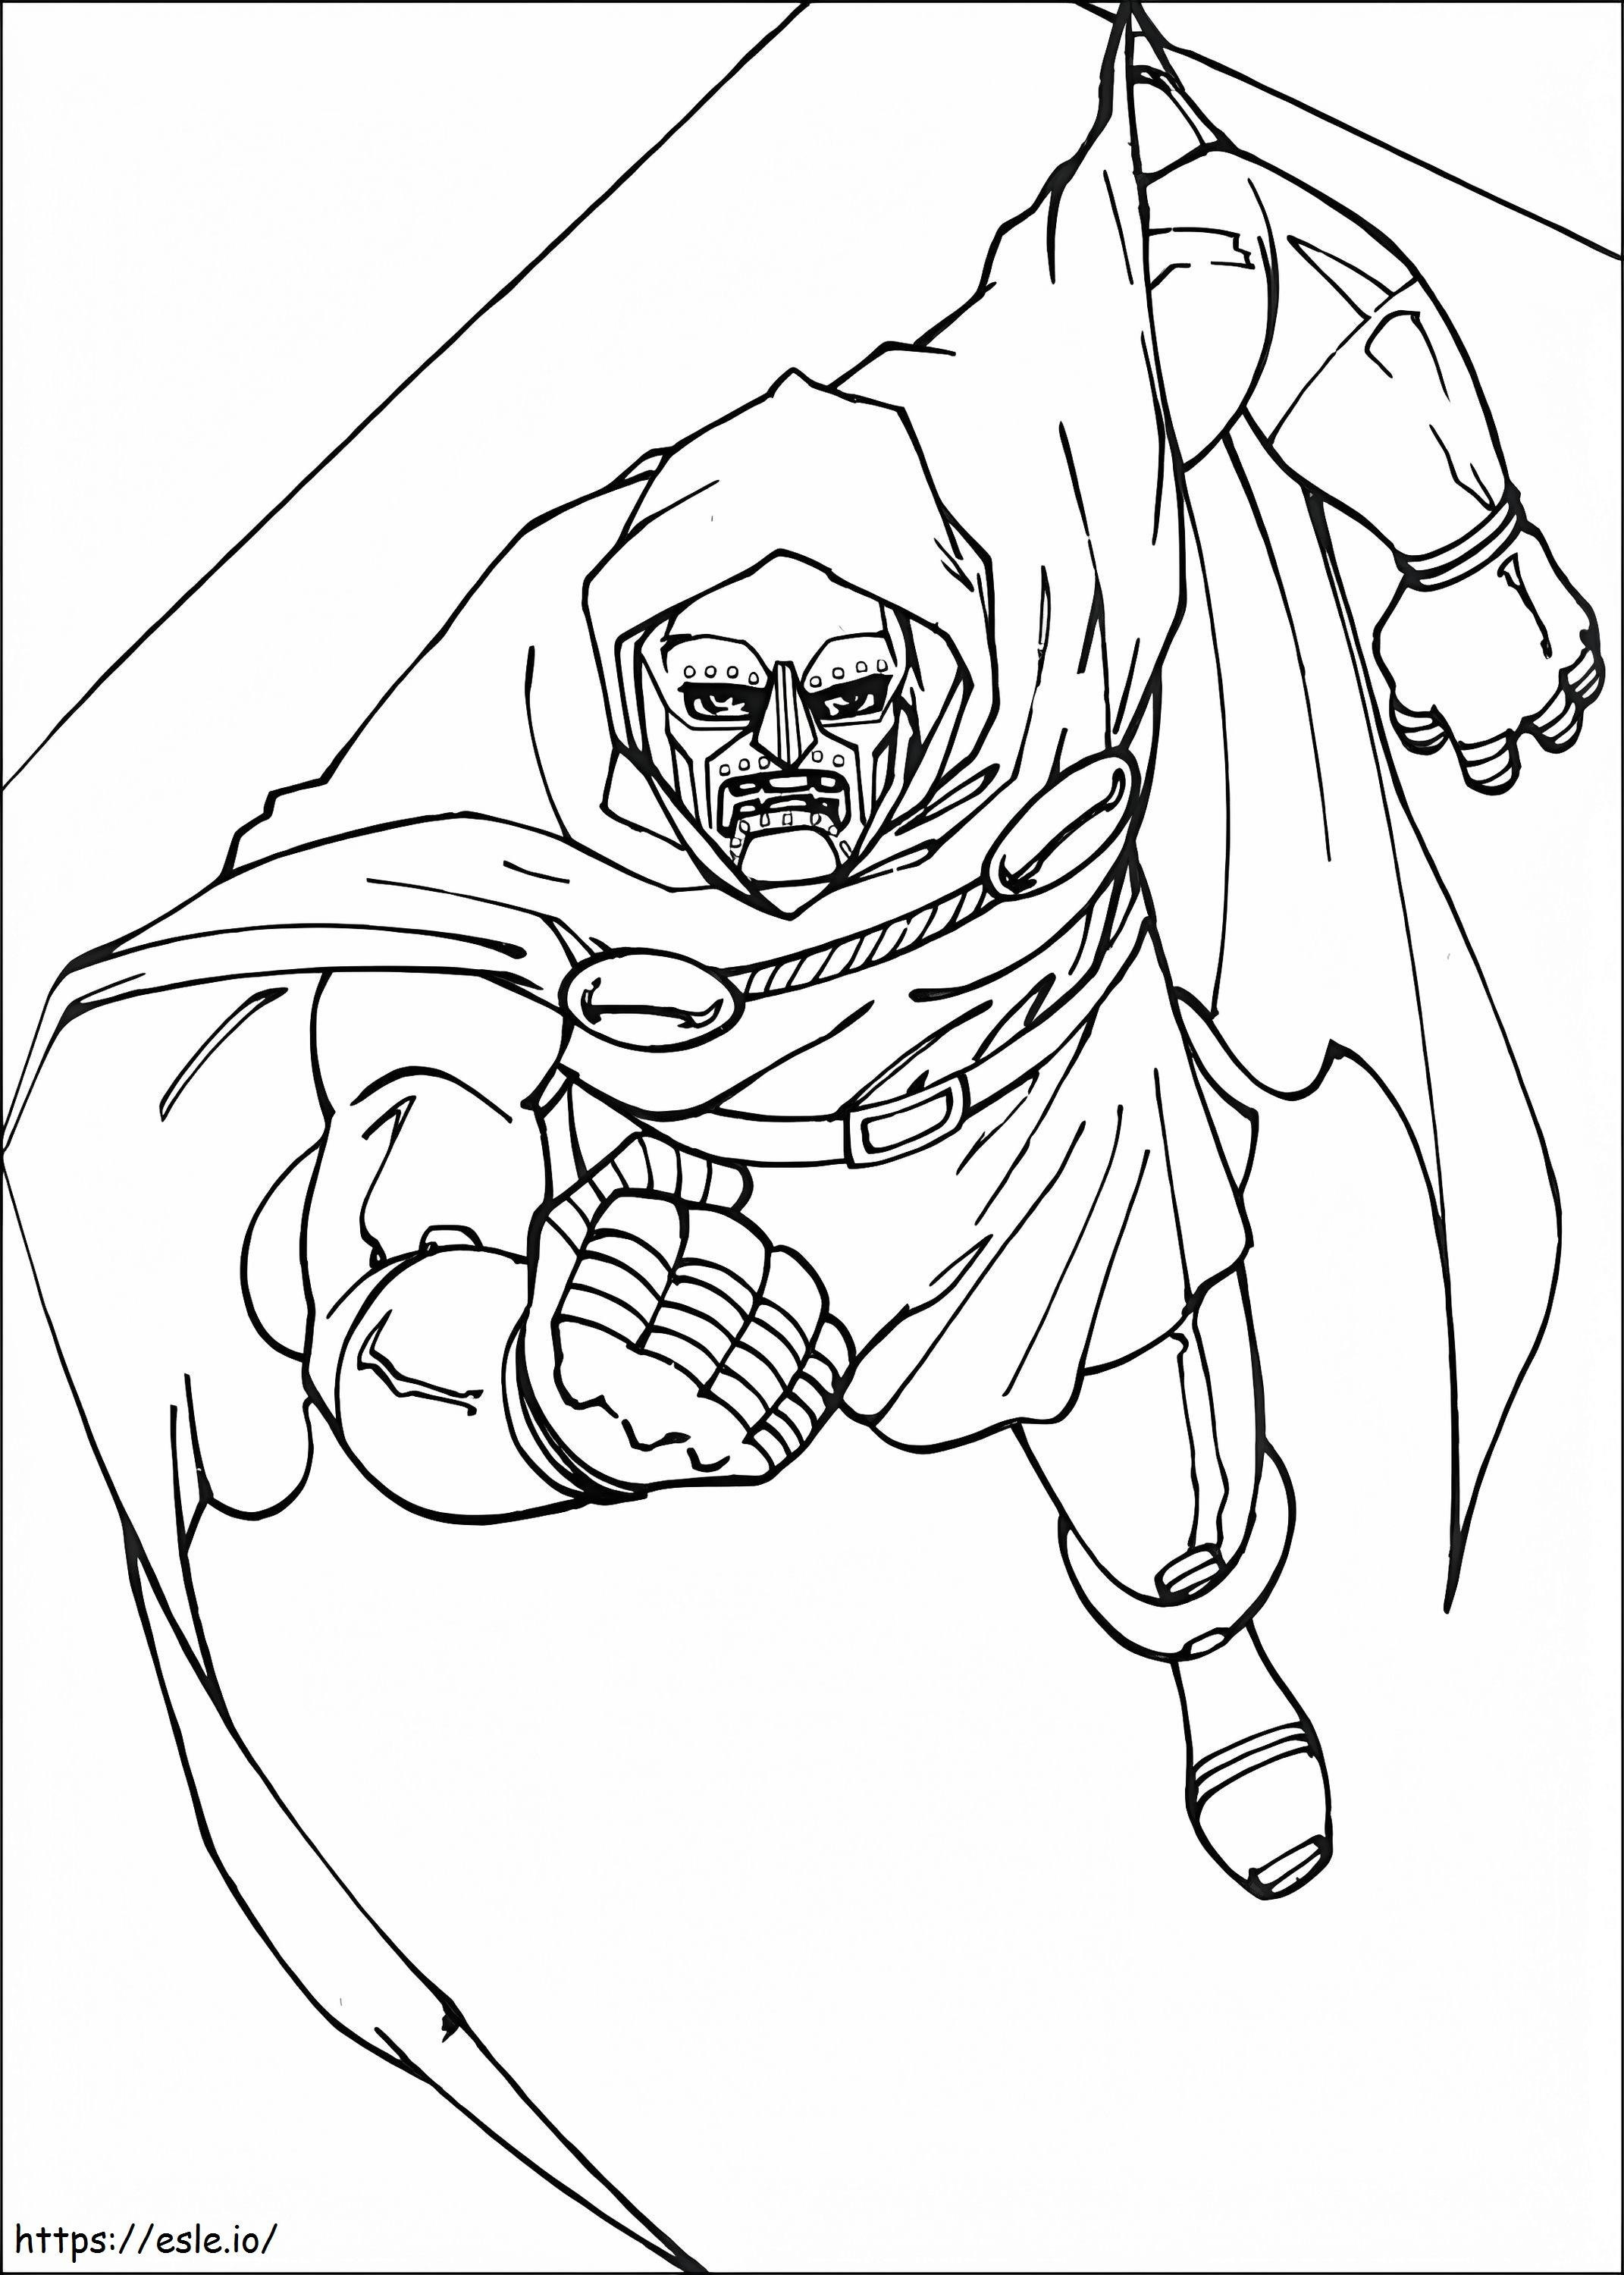 Dr Doom From Fantastic Four coloring page